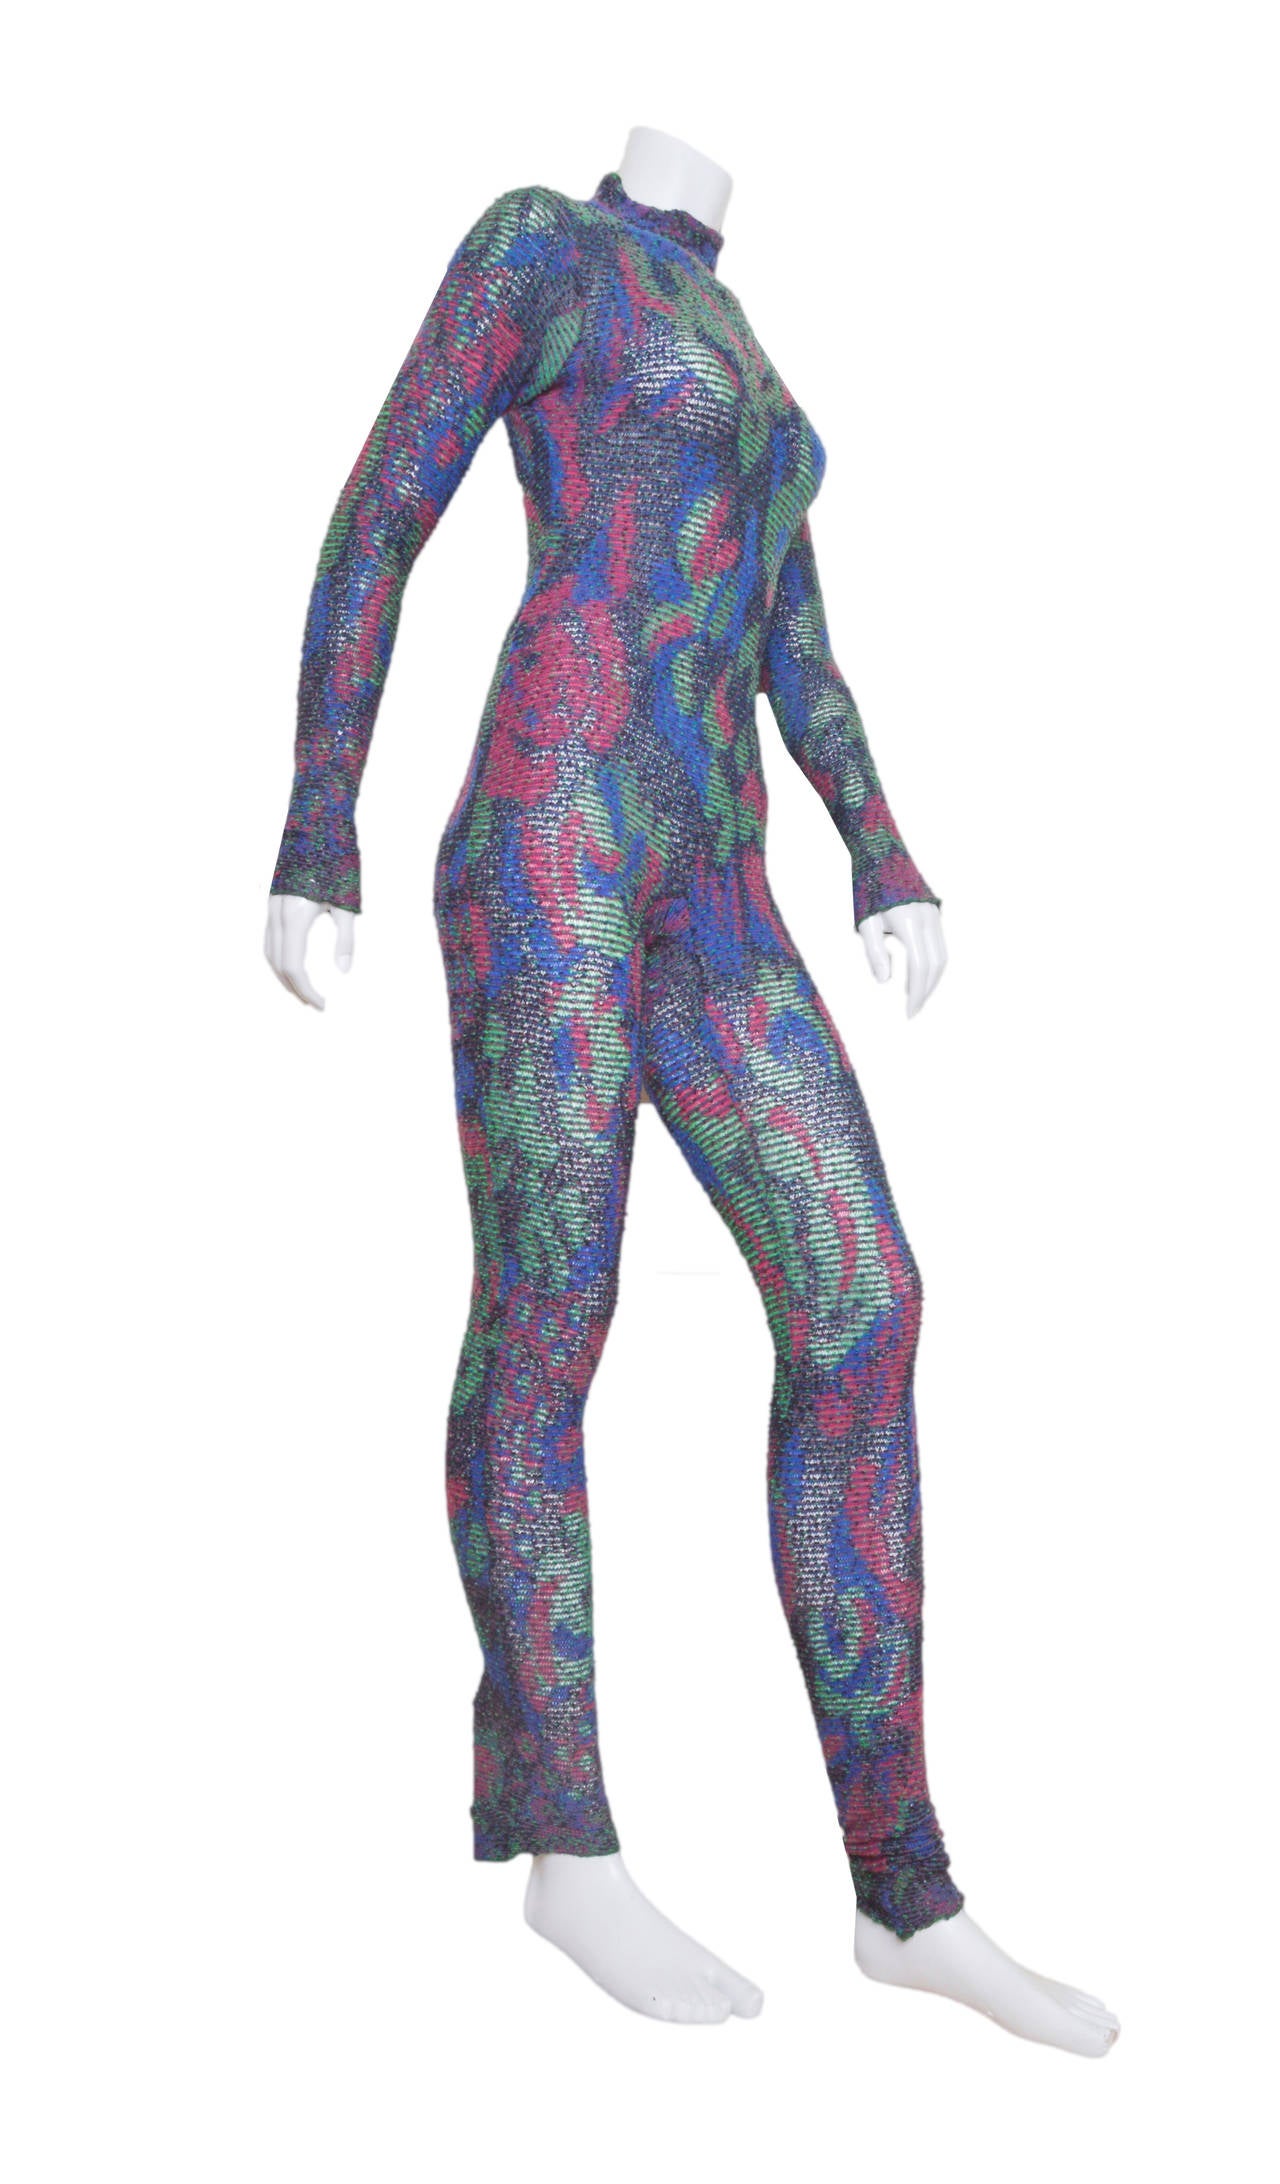 Outstanding Missoni bodysuit.
Jewel tones, emerald green, raspberry, cobalt blue & black.
Somewhat open weave, slightly sheer.
Mock turtleneck with shirring.
Shirring at wrists and ankles.
Back zipper.
Tagged size 42.
Measurements were taken